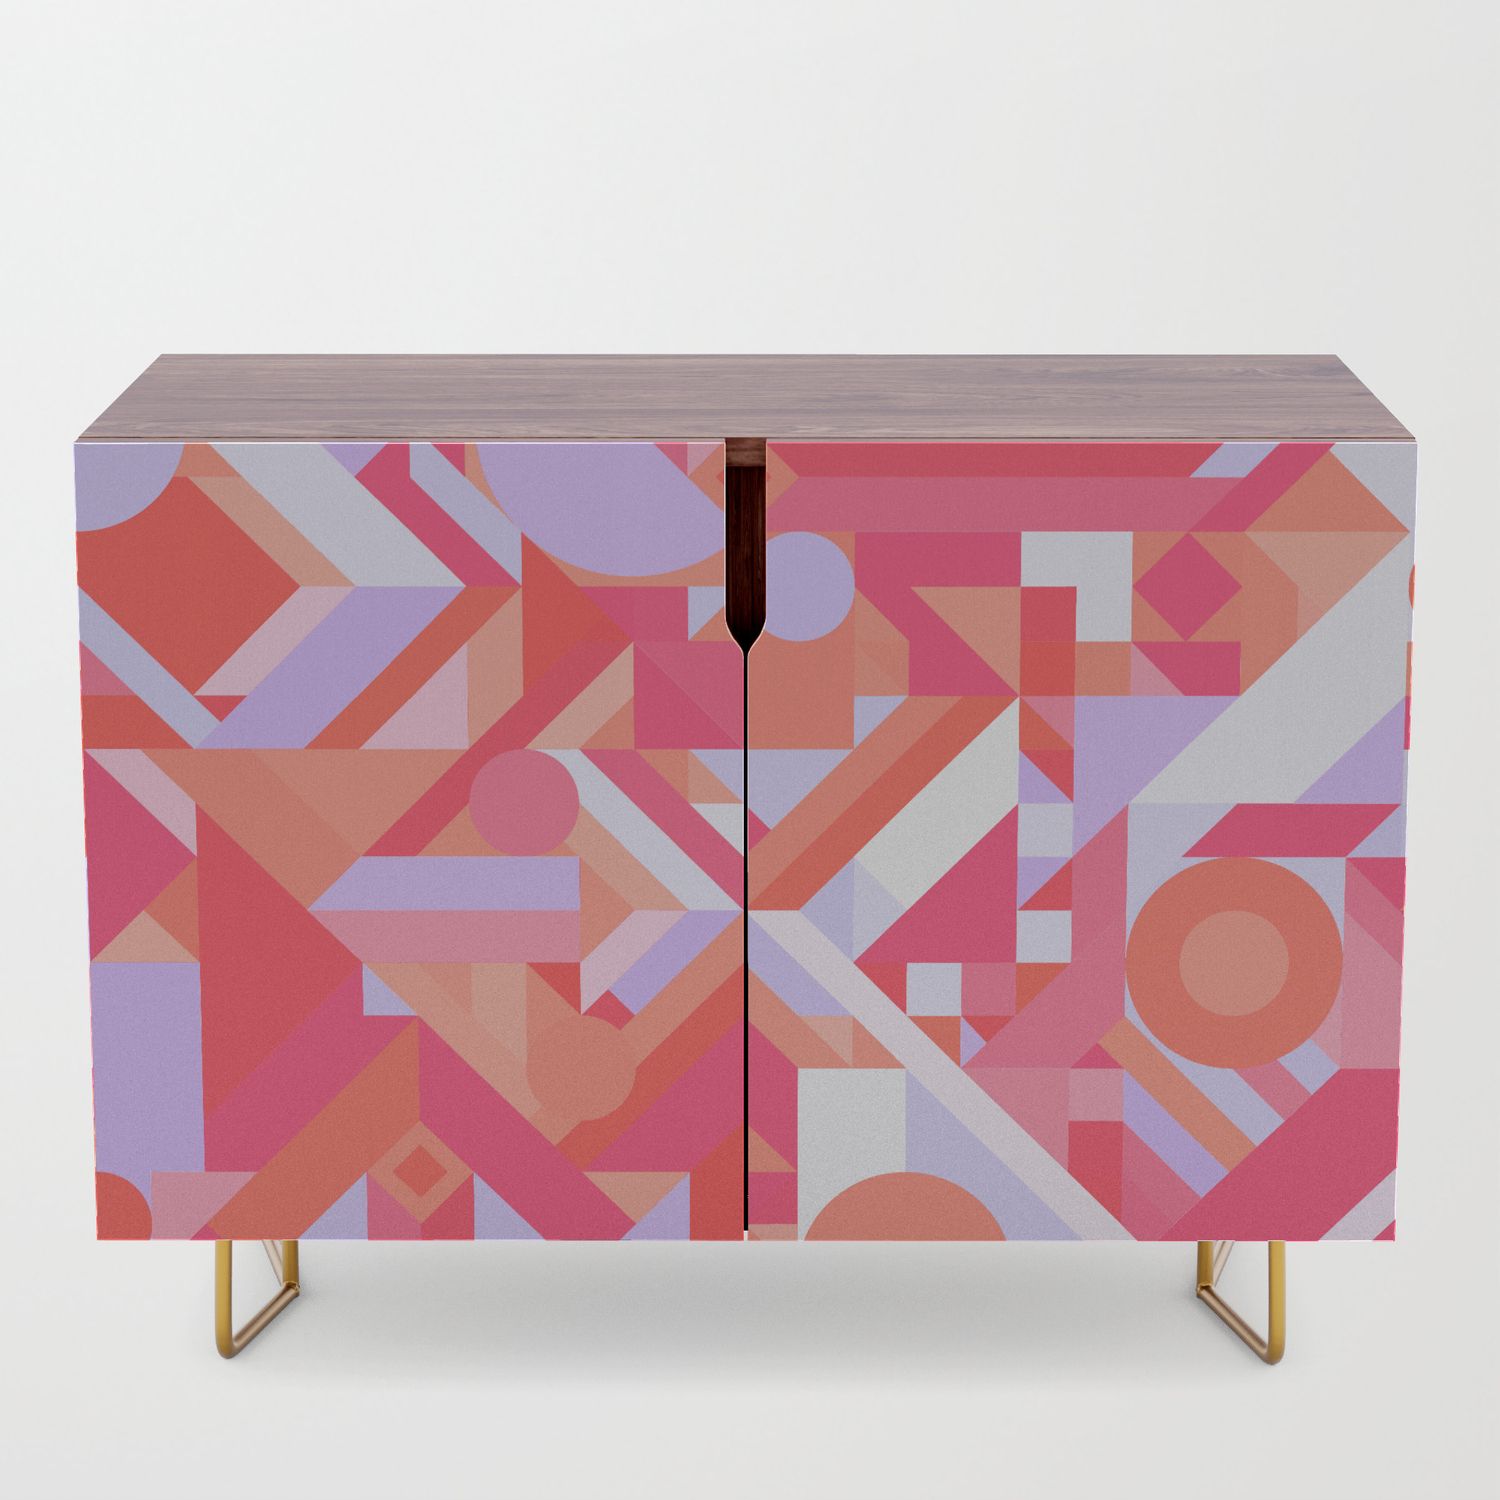 Geometry Shapes Pattern Print (warm Red Lavender Color Scheme) Credenza Intended For Geometric Shapes Credenzas (View 17 of 30)